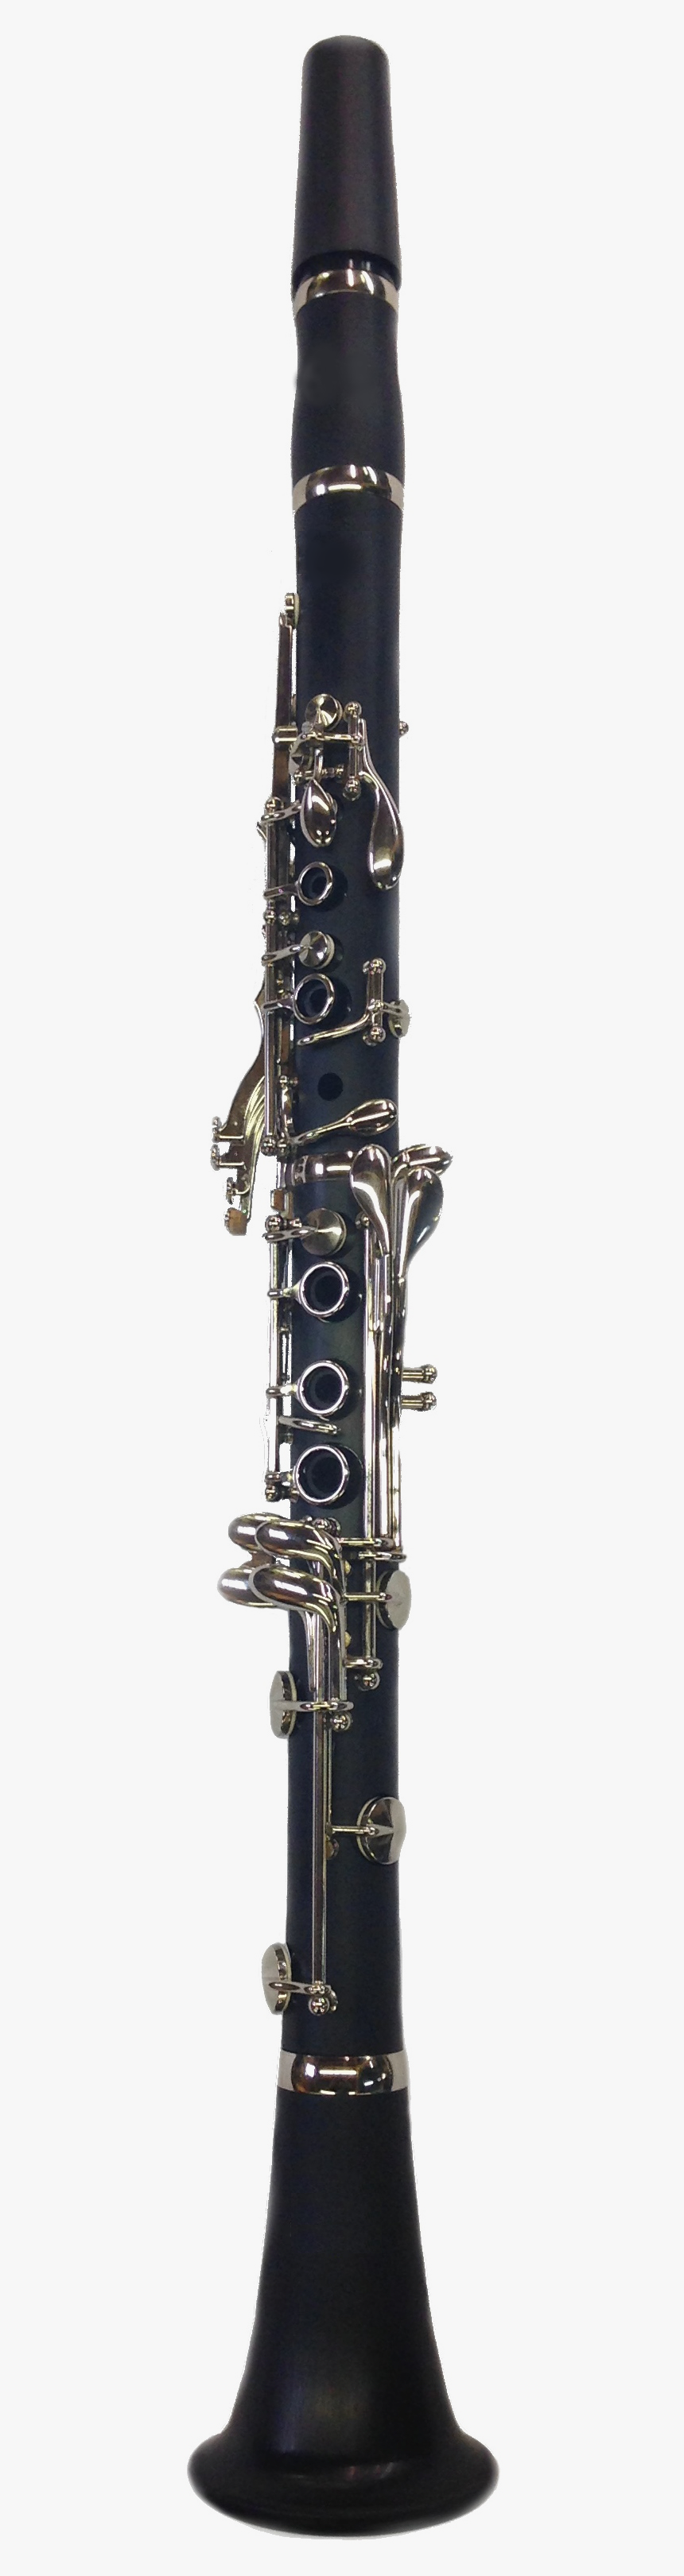 B Clarinet Transparent Background, HD Png Download, Free Download